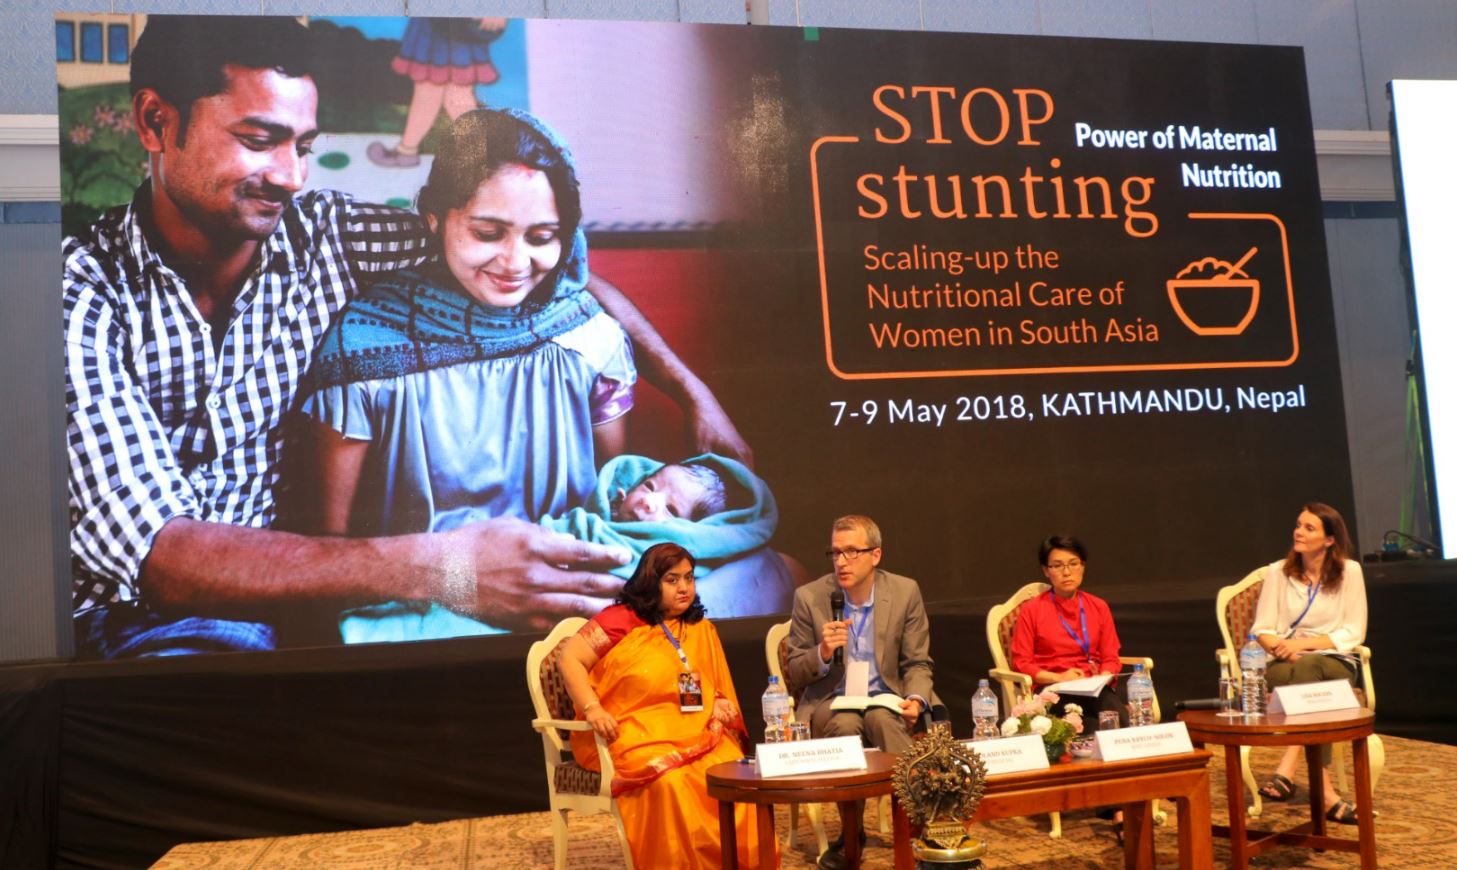 Nutrition International and UNICEF partner to scale up maternal nutrition services